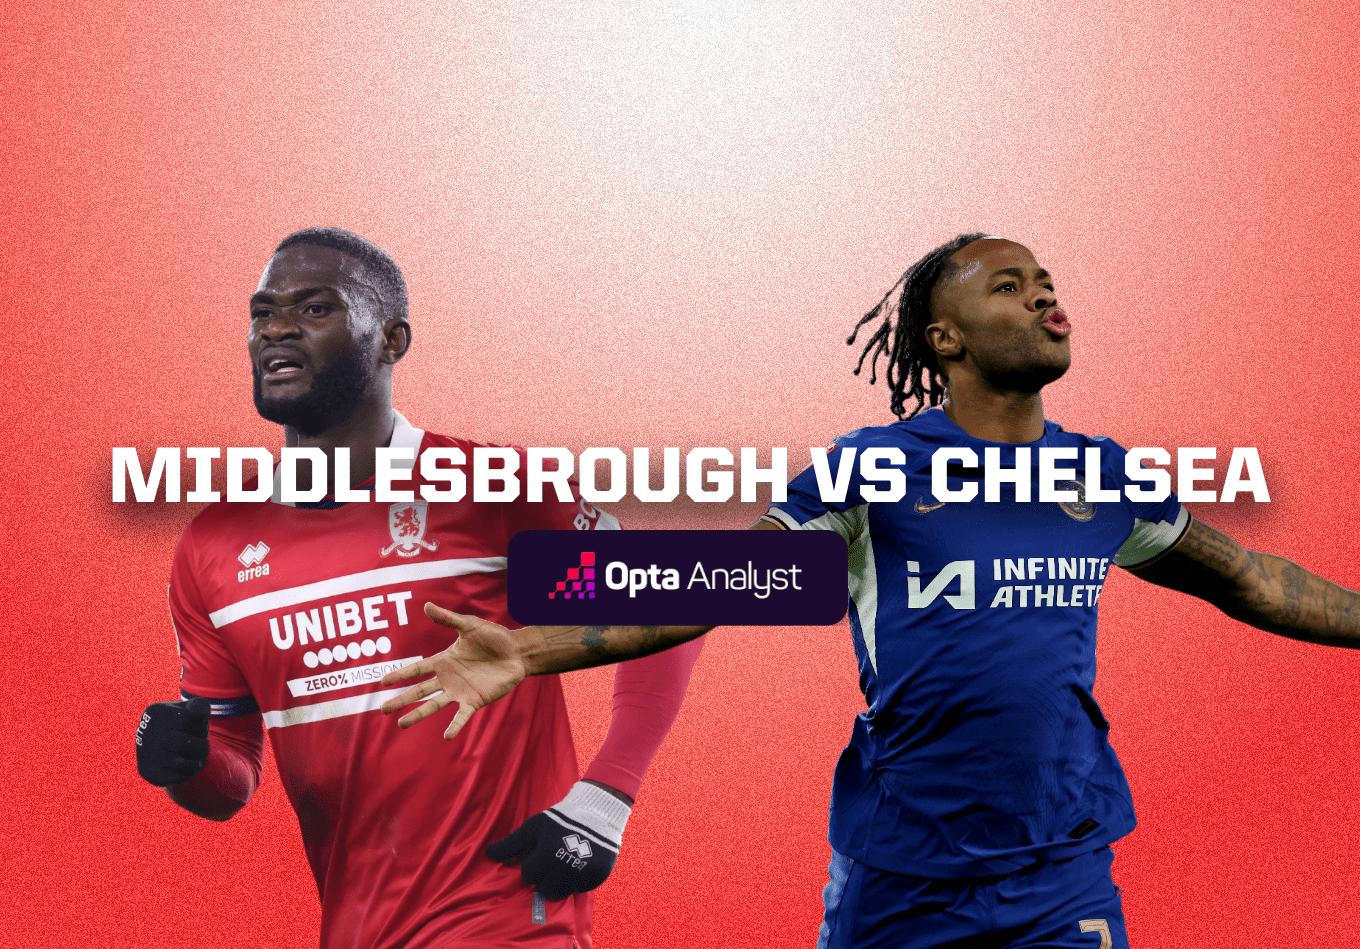 Middlesbrough vs Chelsea Prediction: EFL Cup Semi-Final First Leg Preview